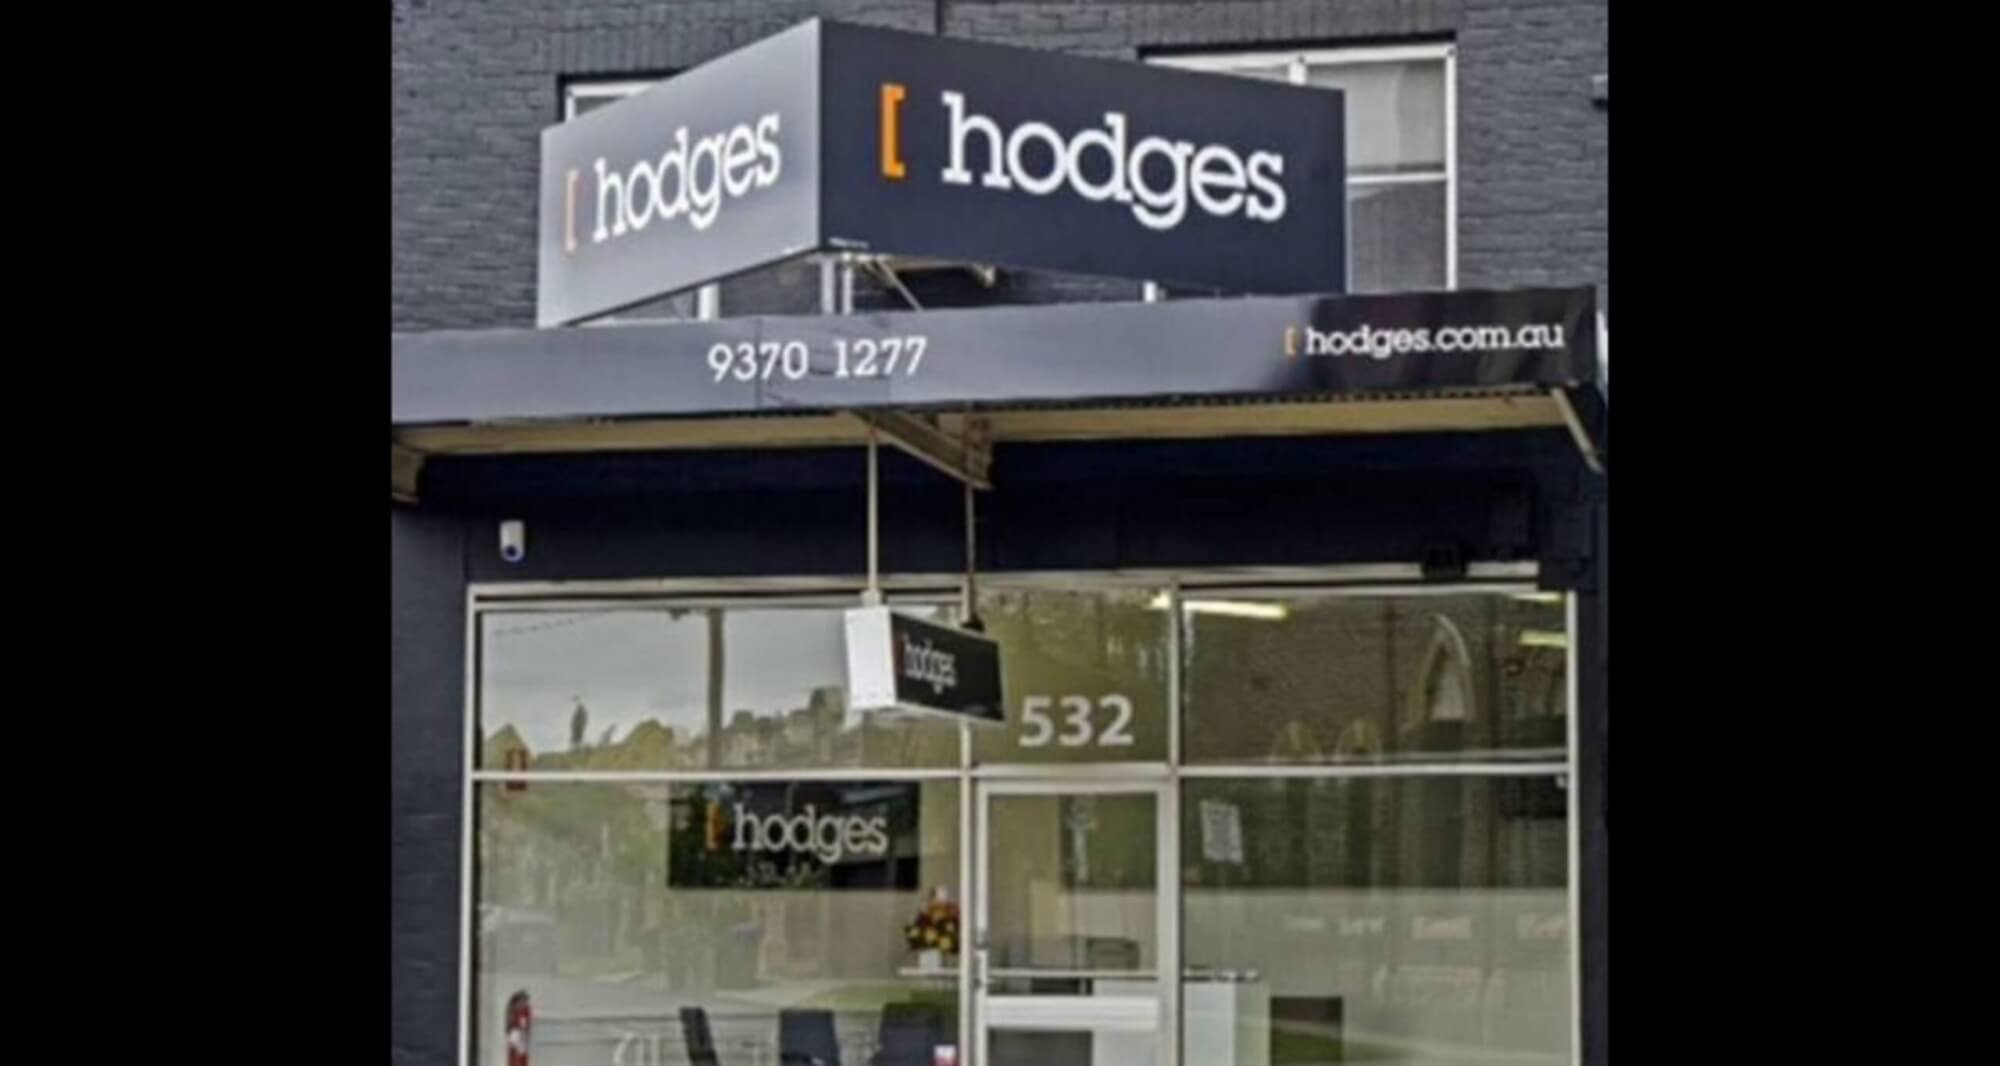 Hodges Real Estate Launches In Melbourne’s North-West, By Jennifer Duke, Property Observer